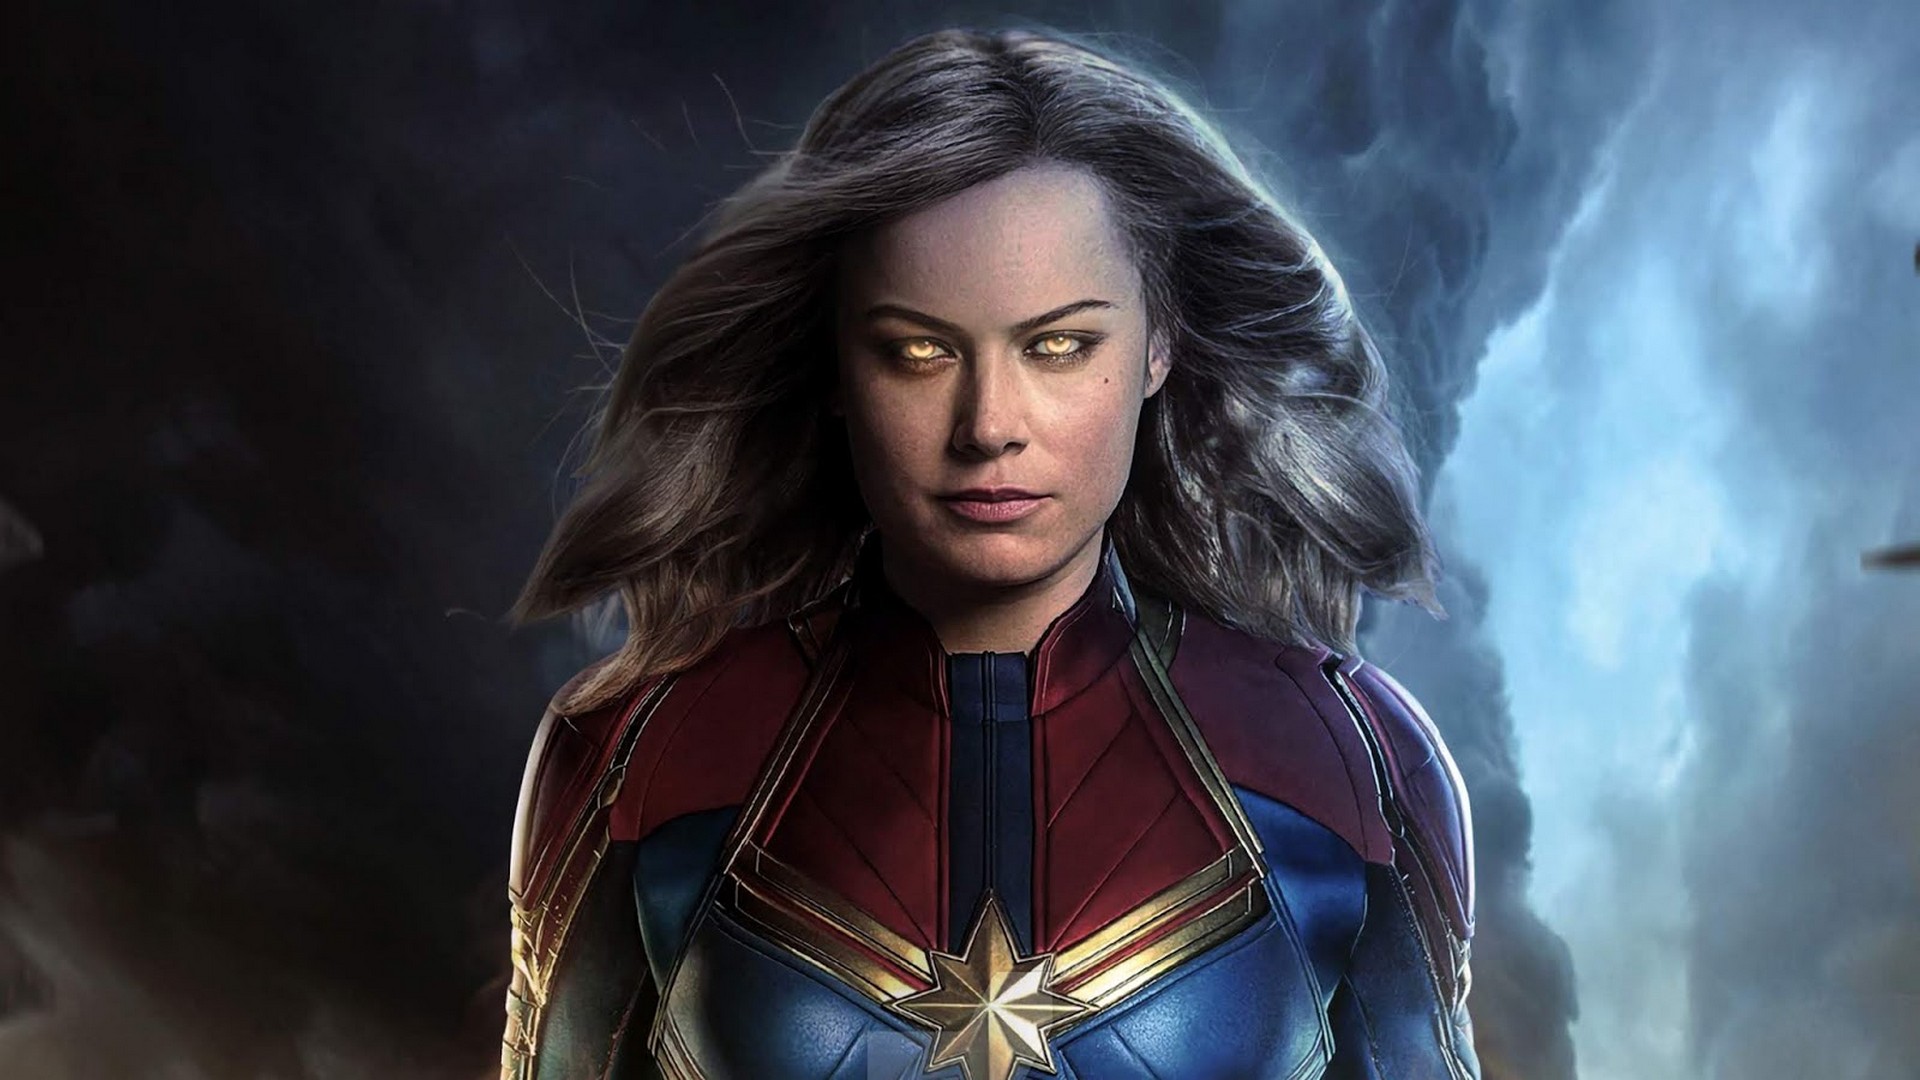 Captain Marvel Wallpaper Hd With High-resolution Pixel - Brie Larson - HD Wallpaper 